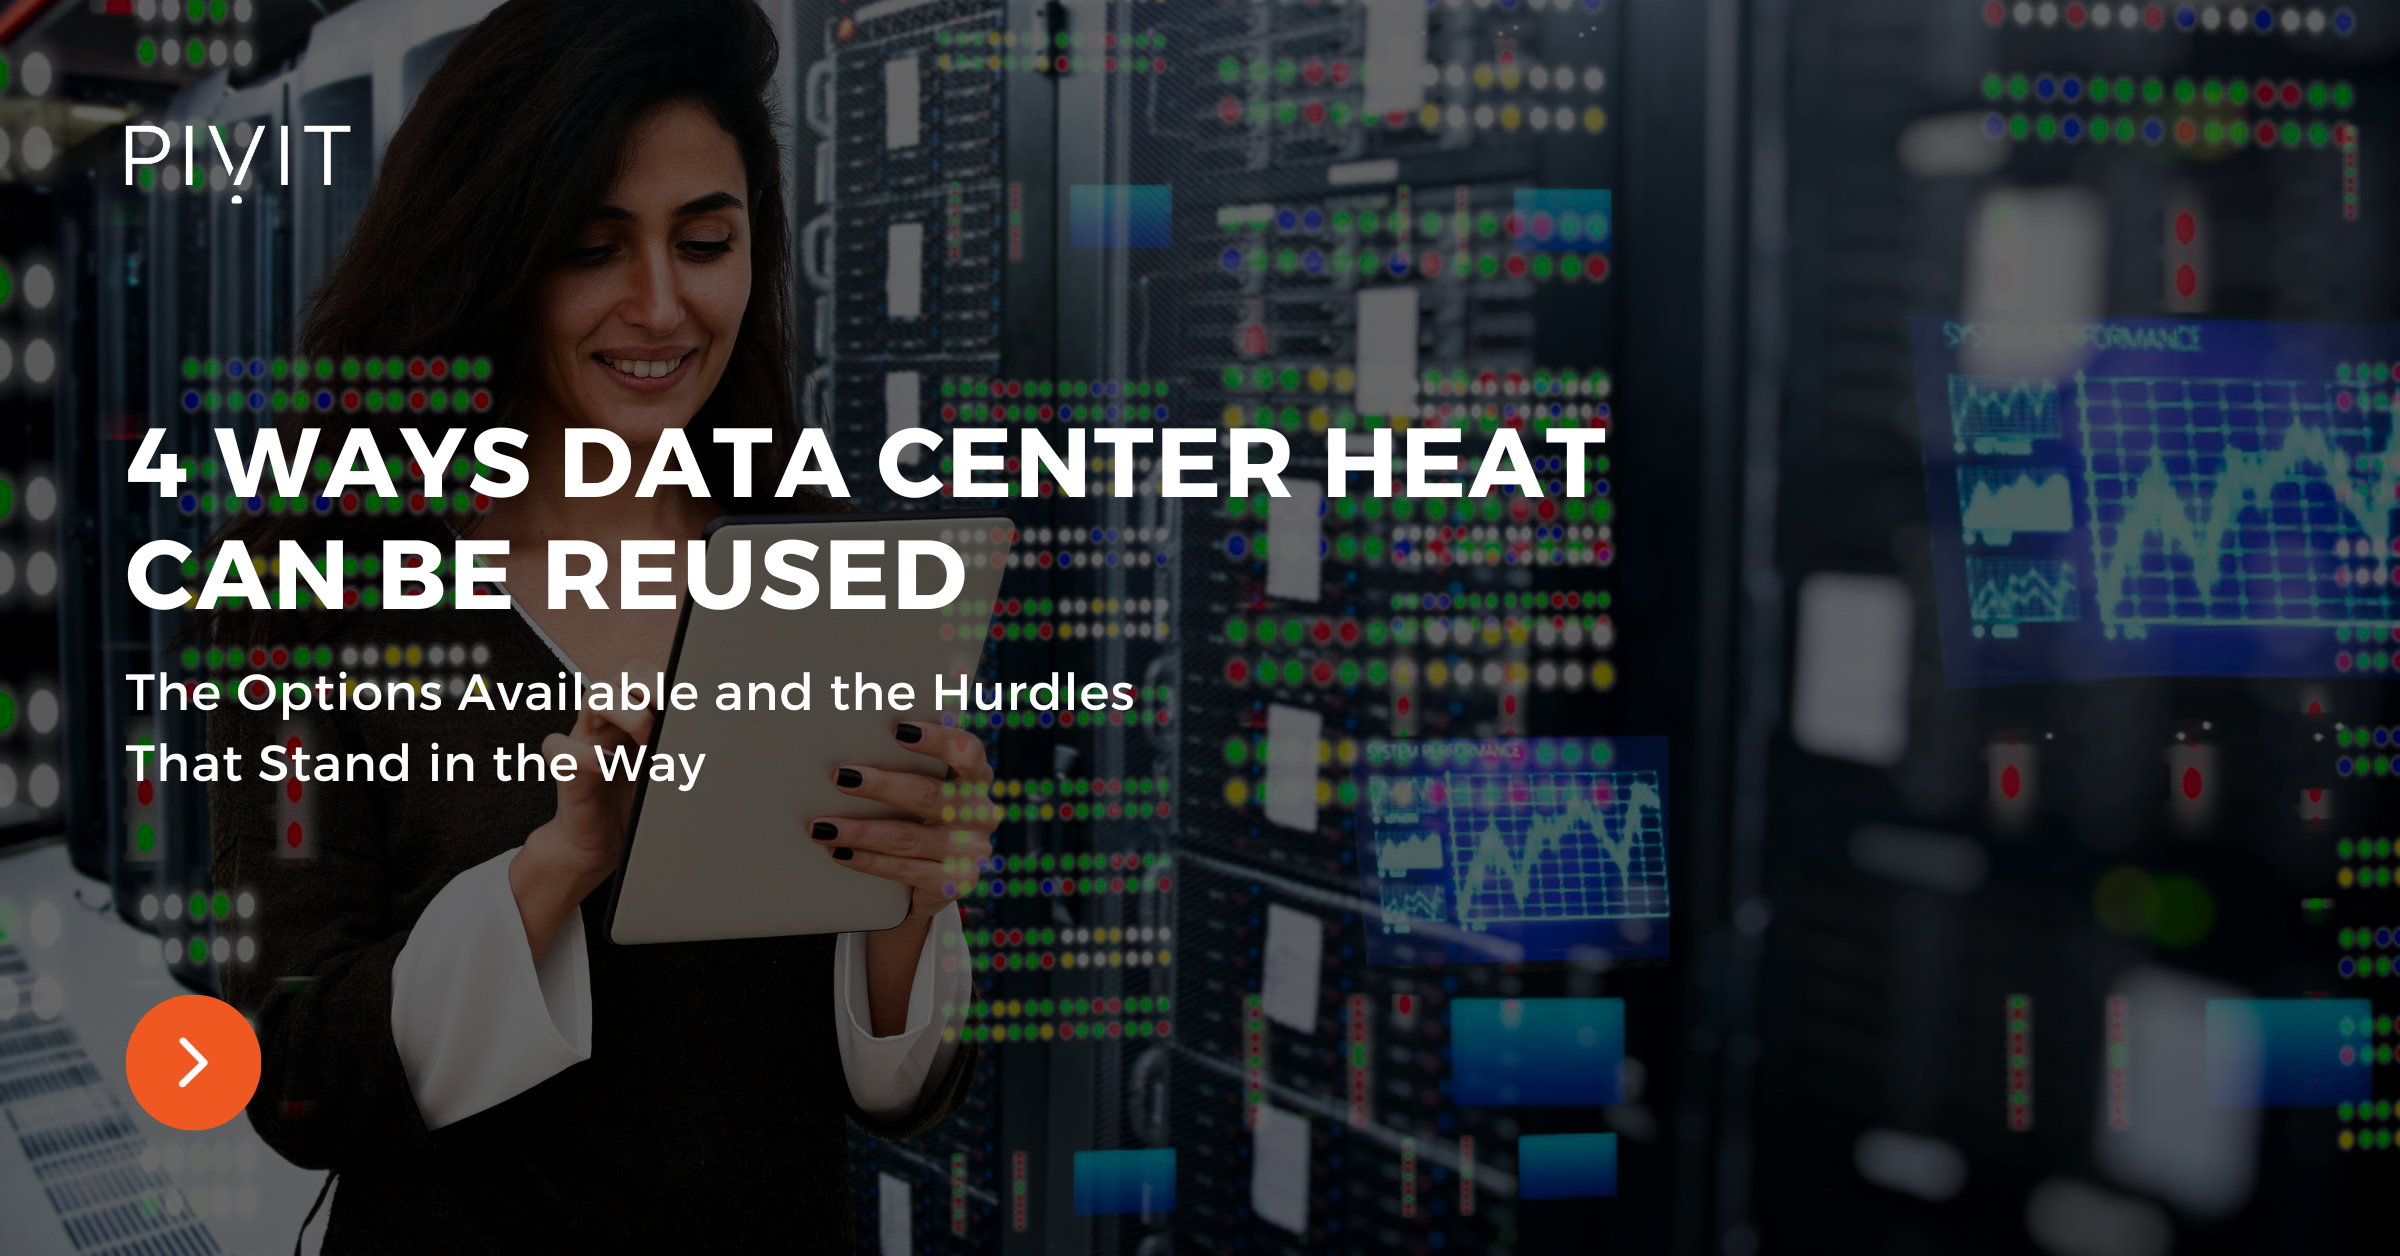 4 Ways Data Center Heat Can Be Reused - The Options Available and the Hurdles That Stand in the Way